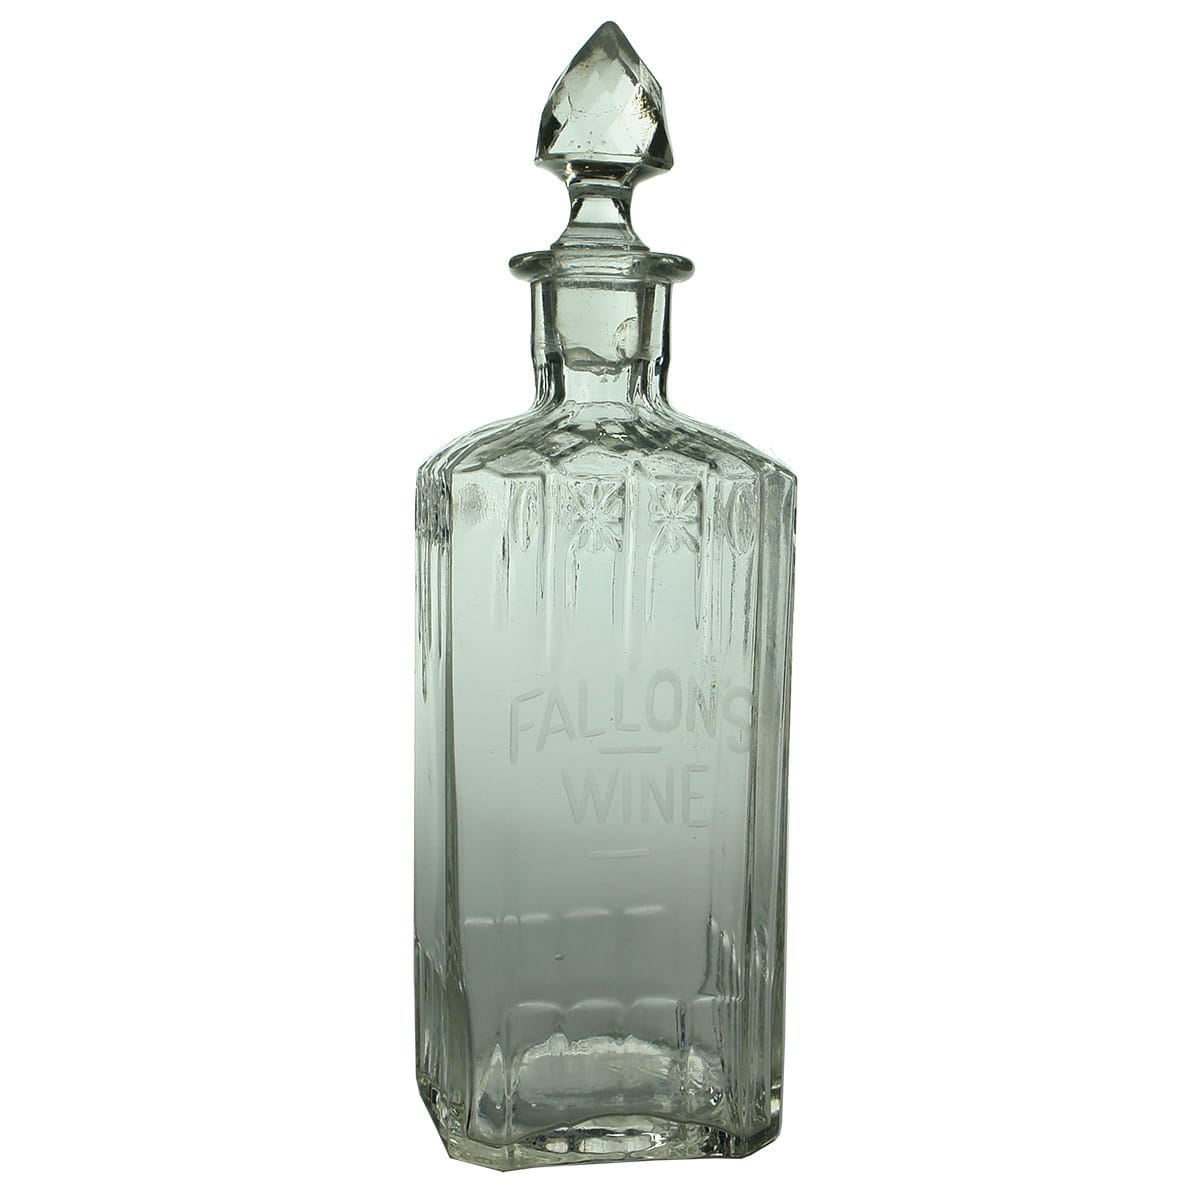 Decanter. Fallon's Wine. Moulded glass. Clear. 26 oz. (New South Wales)